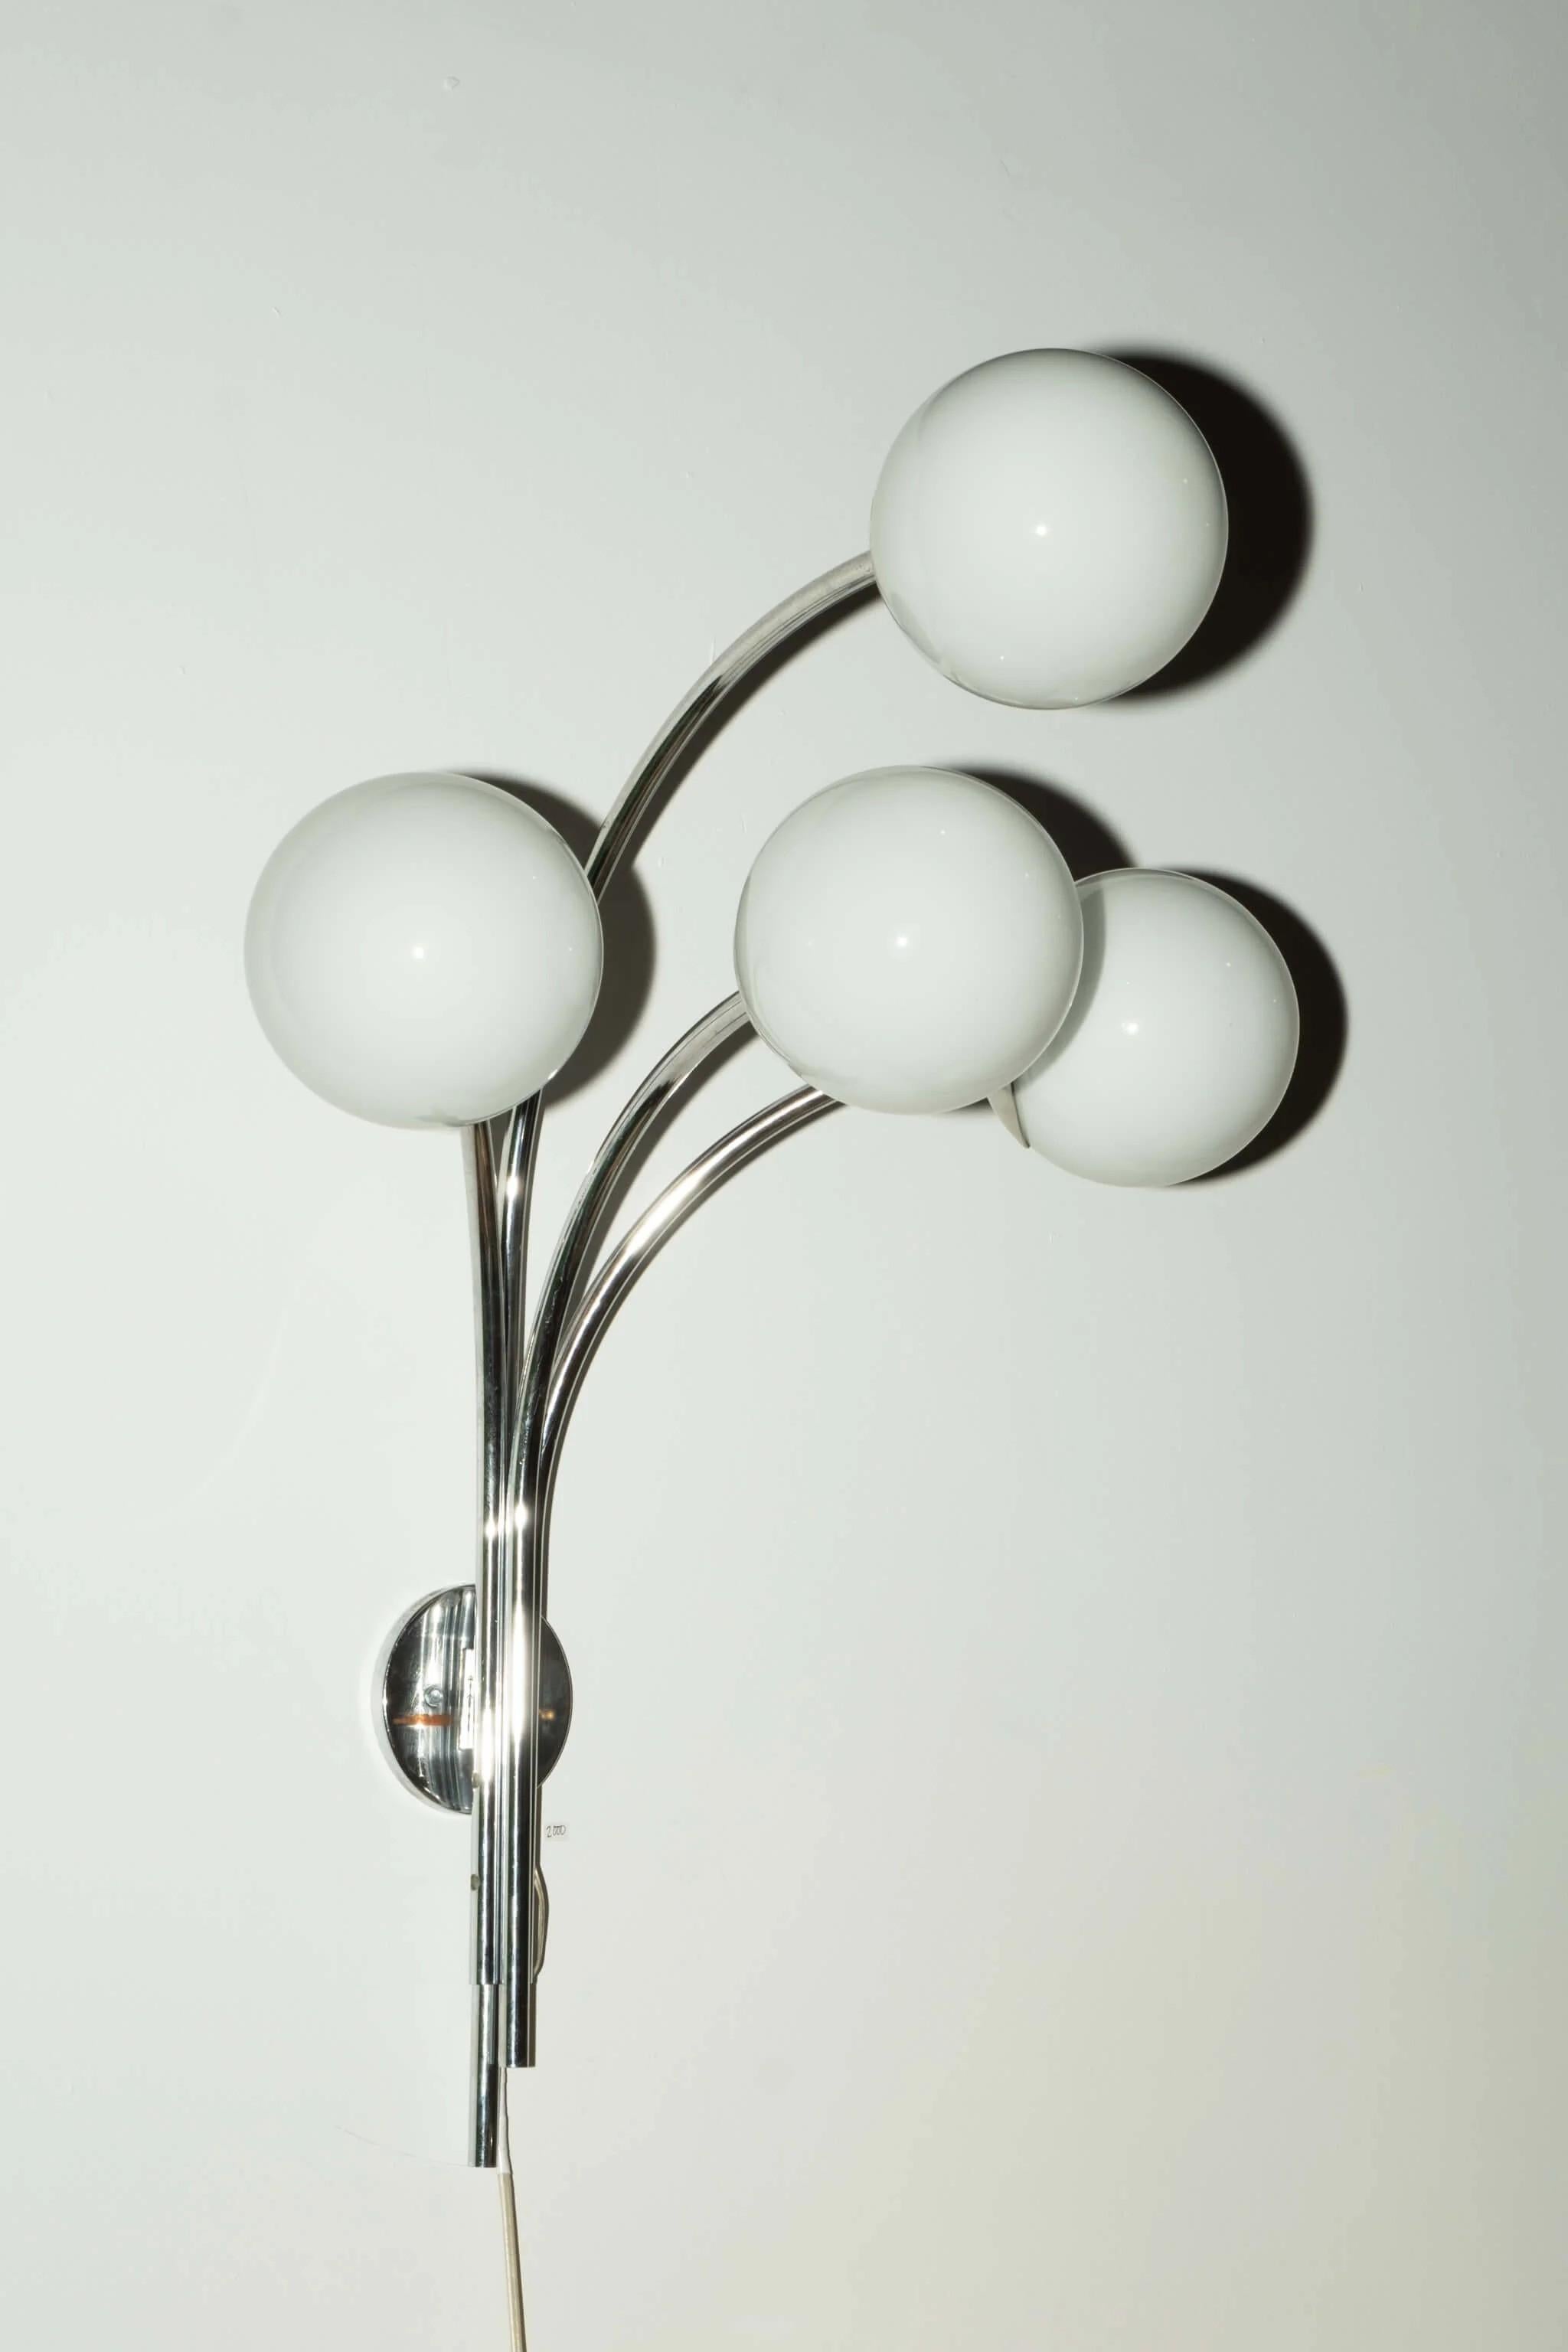 A bouquet of chrome with 4 glass 'flowers' projects spectacularly from the wall on this 1960s wonder from Arteluce - one of the companies at the heart of the creative explosion in postwar Italian design.